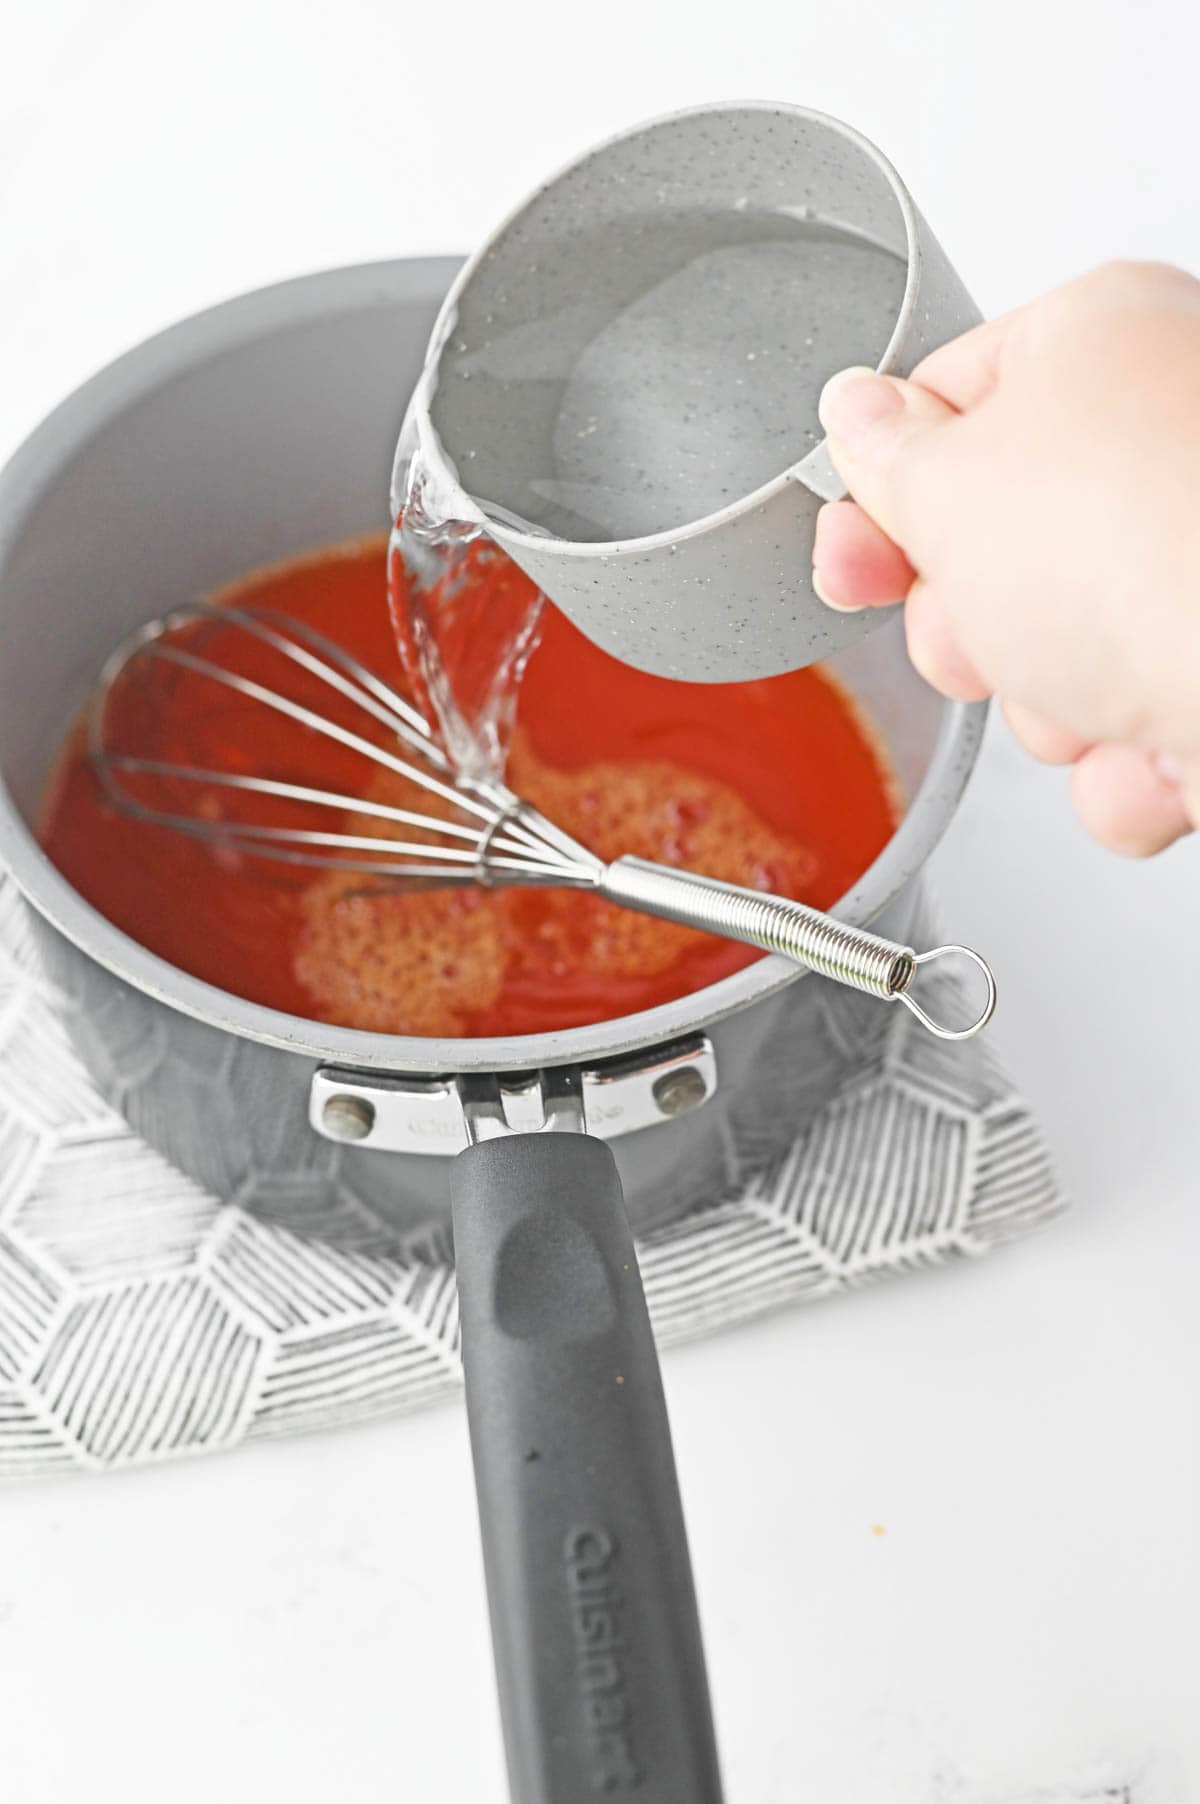 Pouring water into saucepan